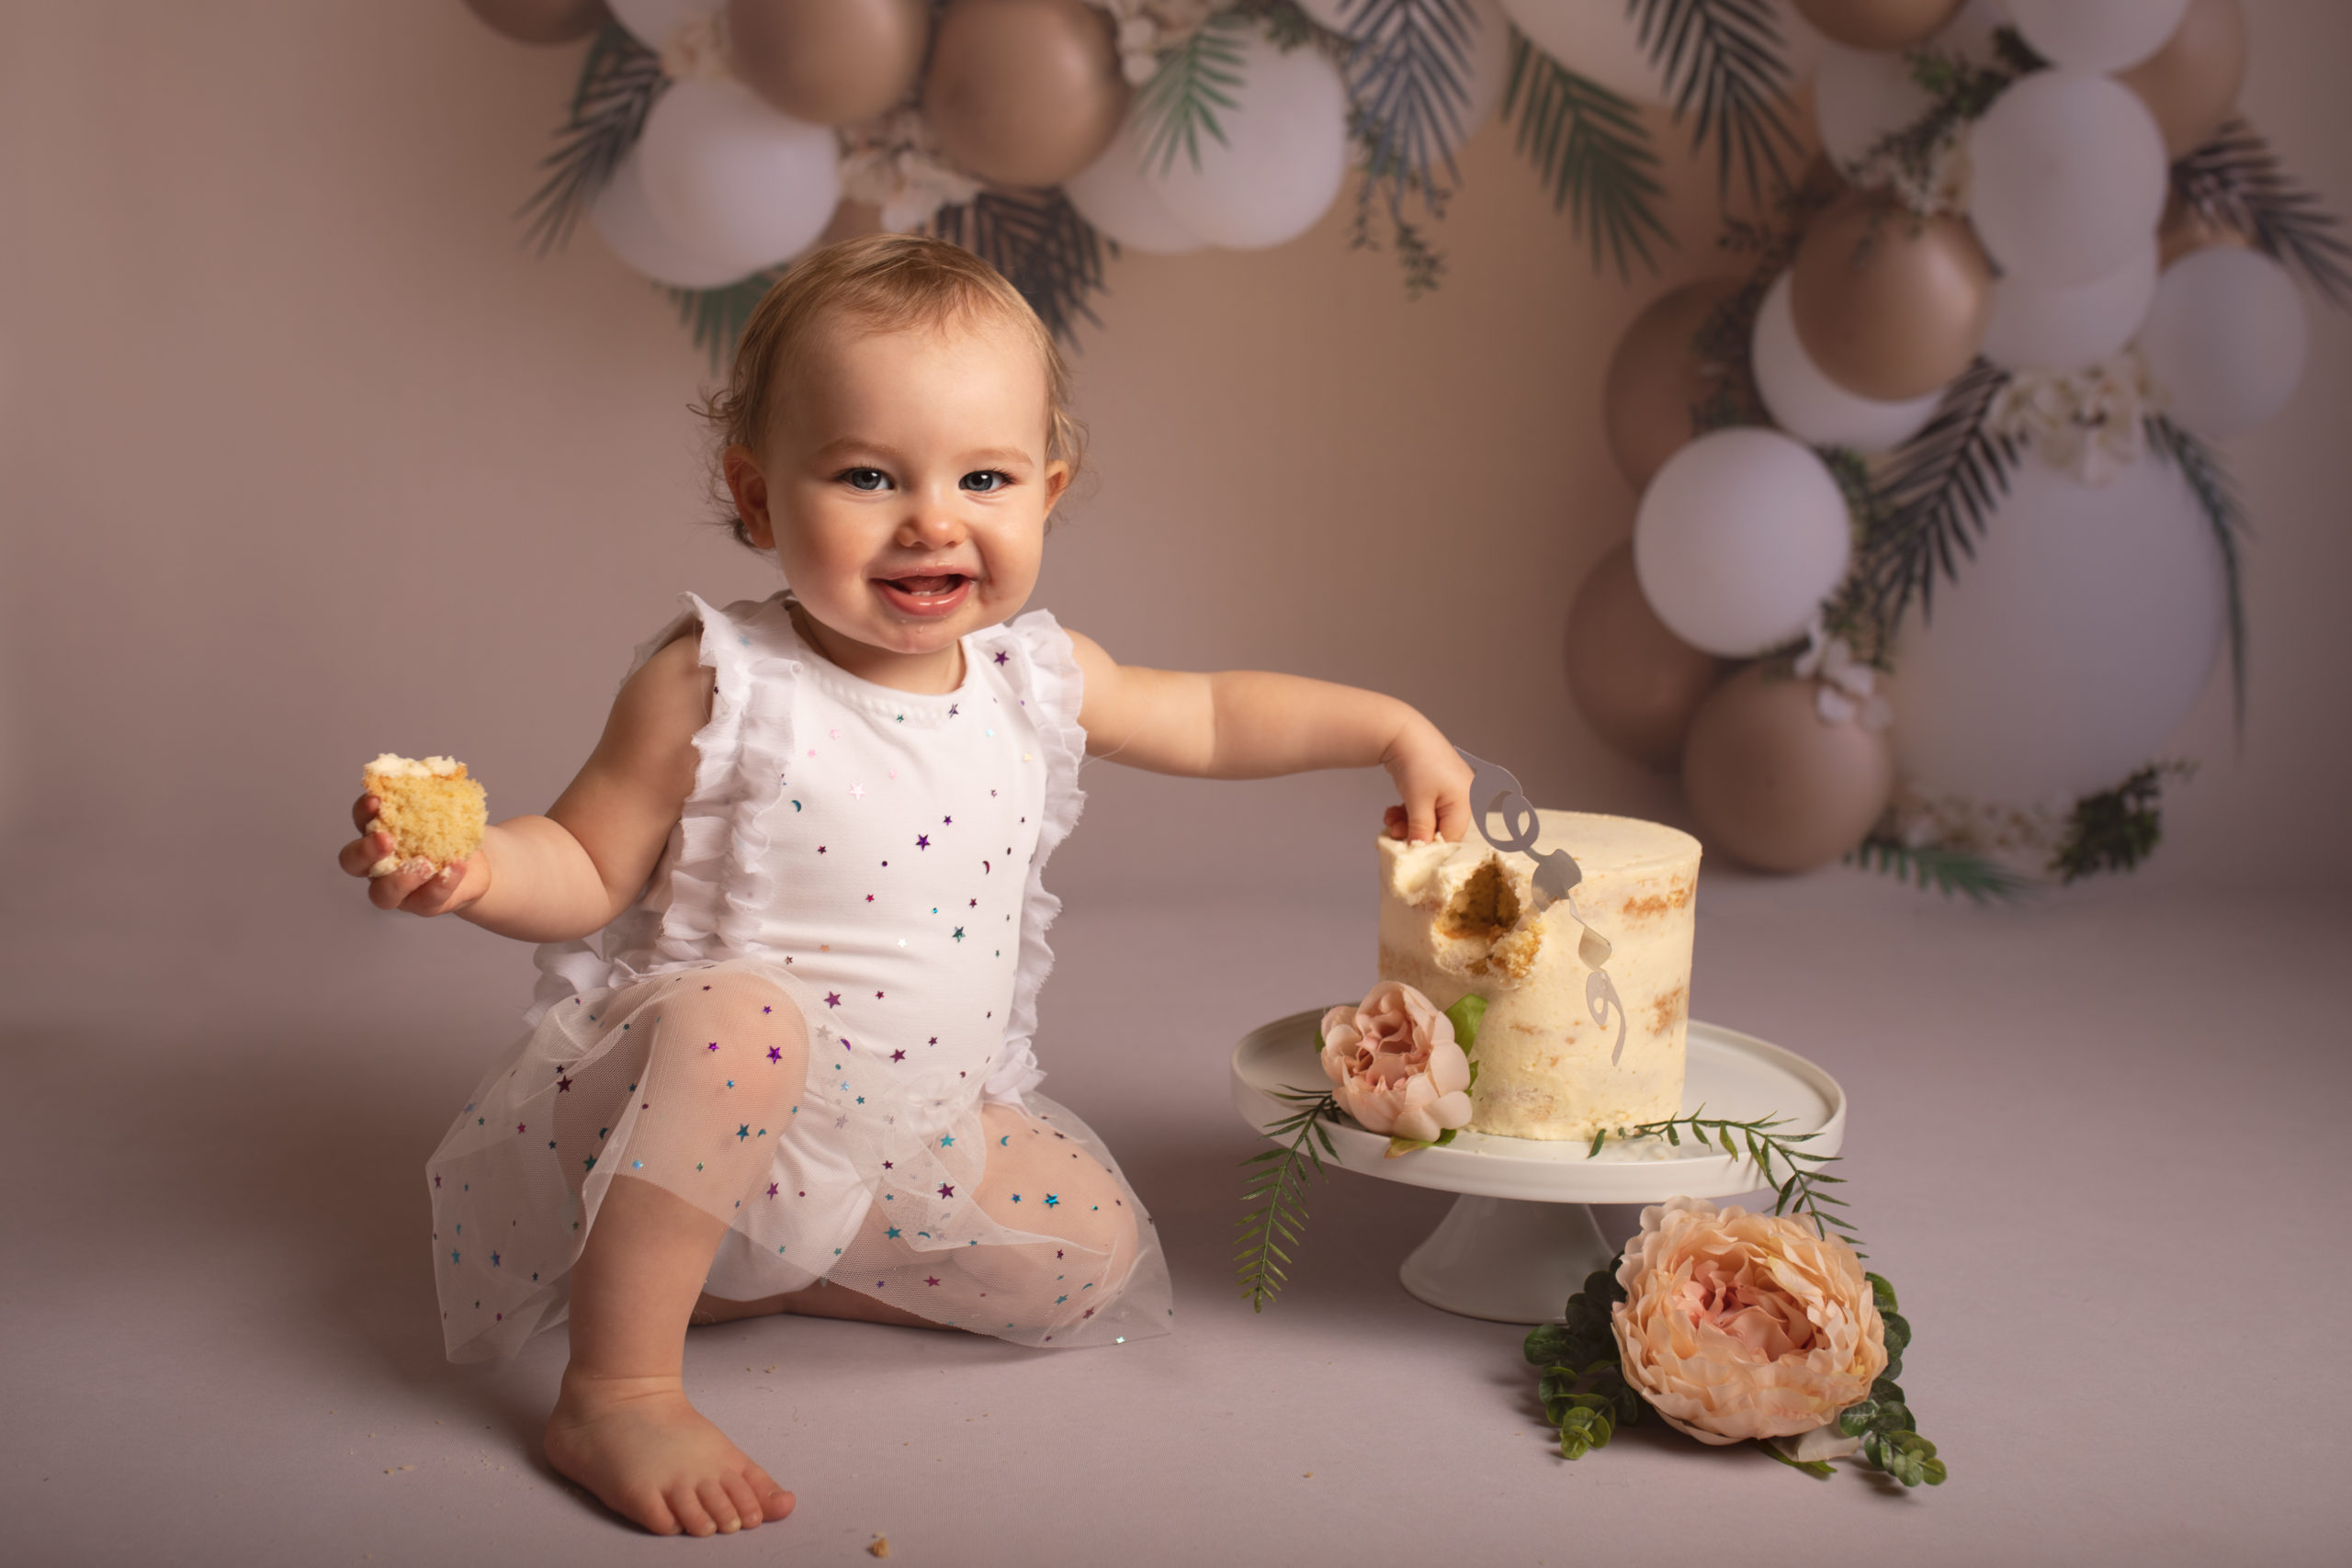 Cake Smash babies birthday girl with hand on cake and a slice in other hand by Cake Smash Photographer in Medway, Kent